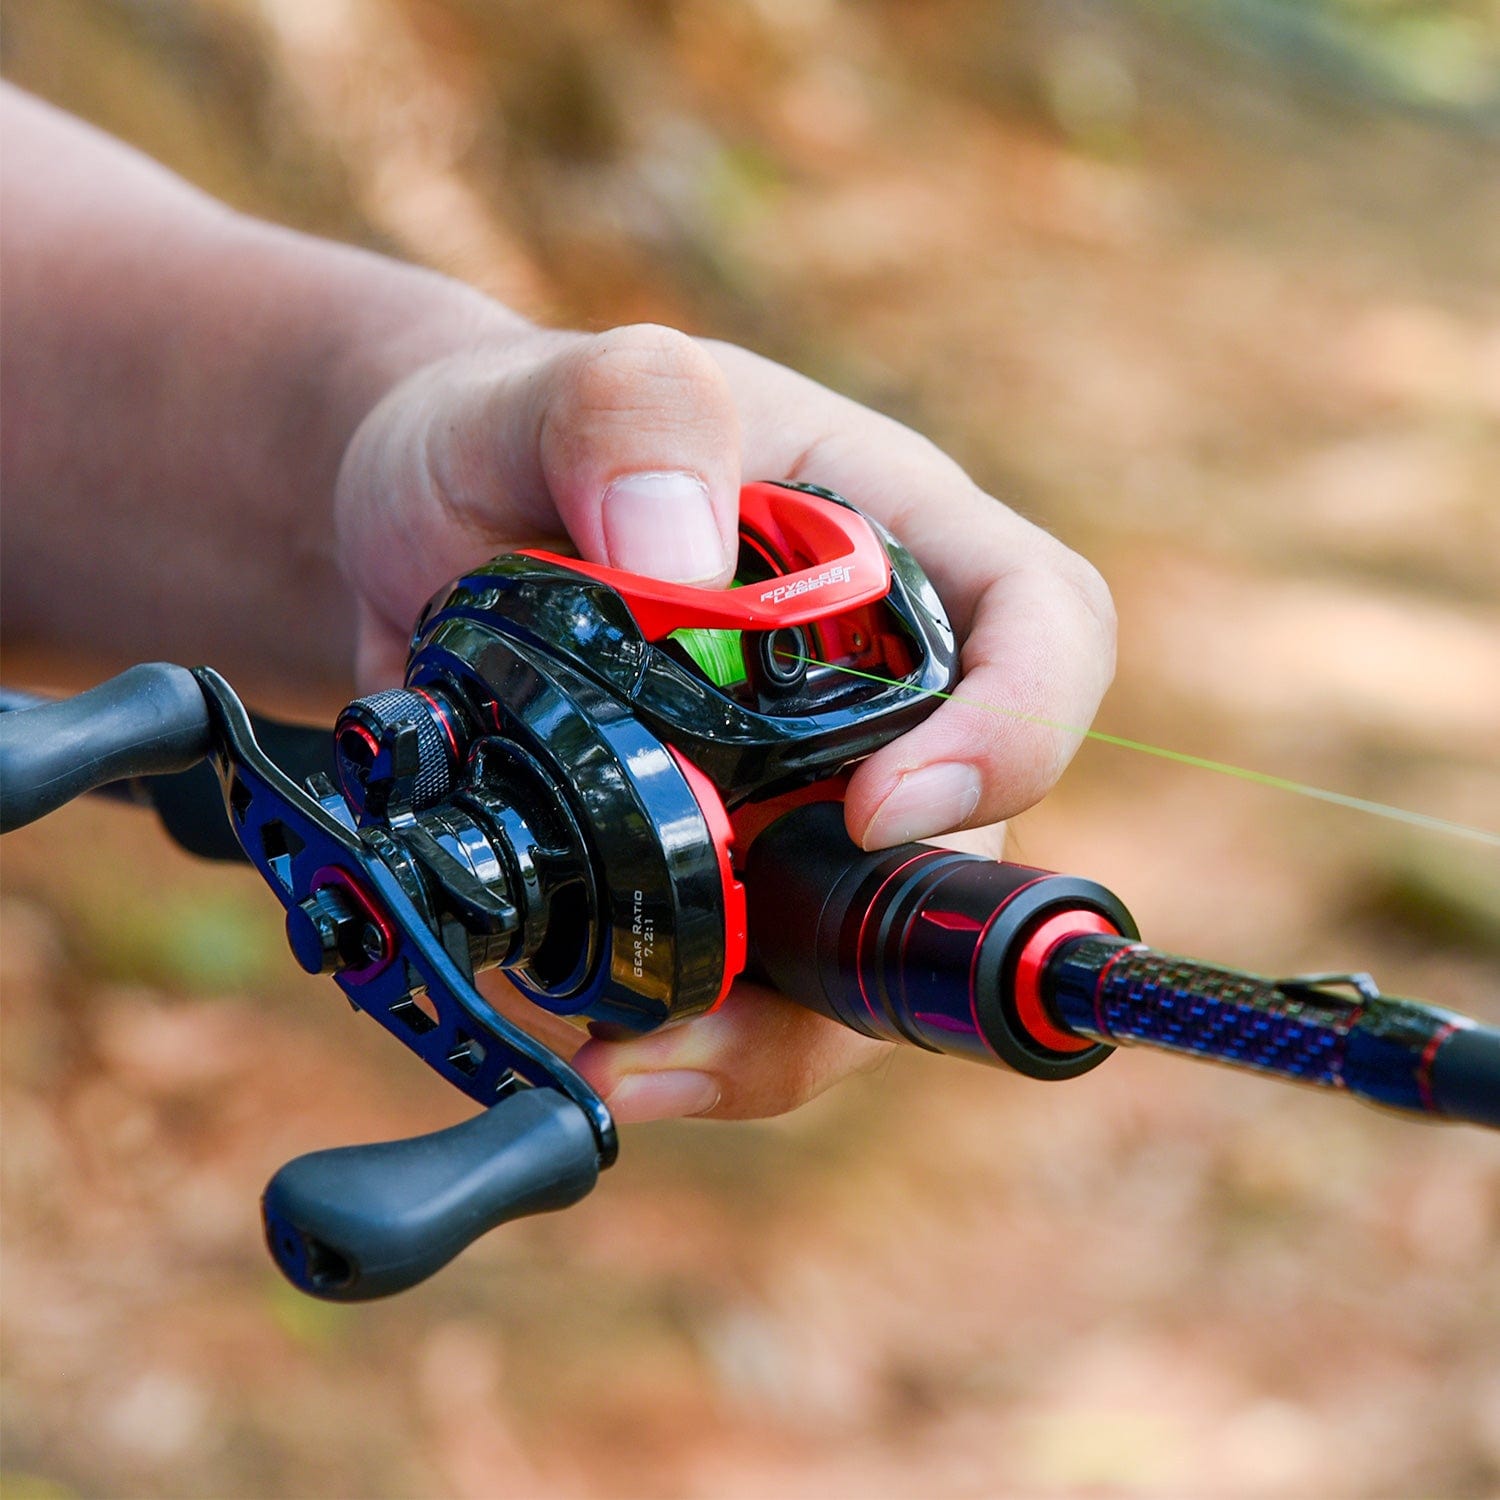 How to Restring a Fishing Reel – KastKing